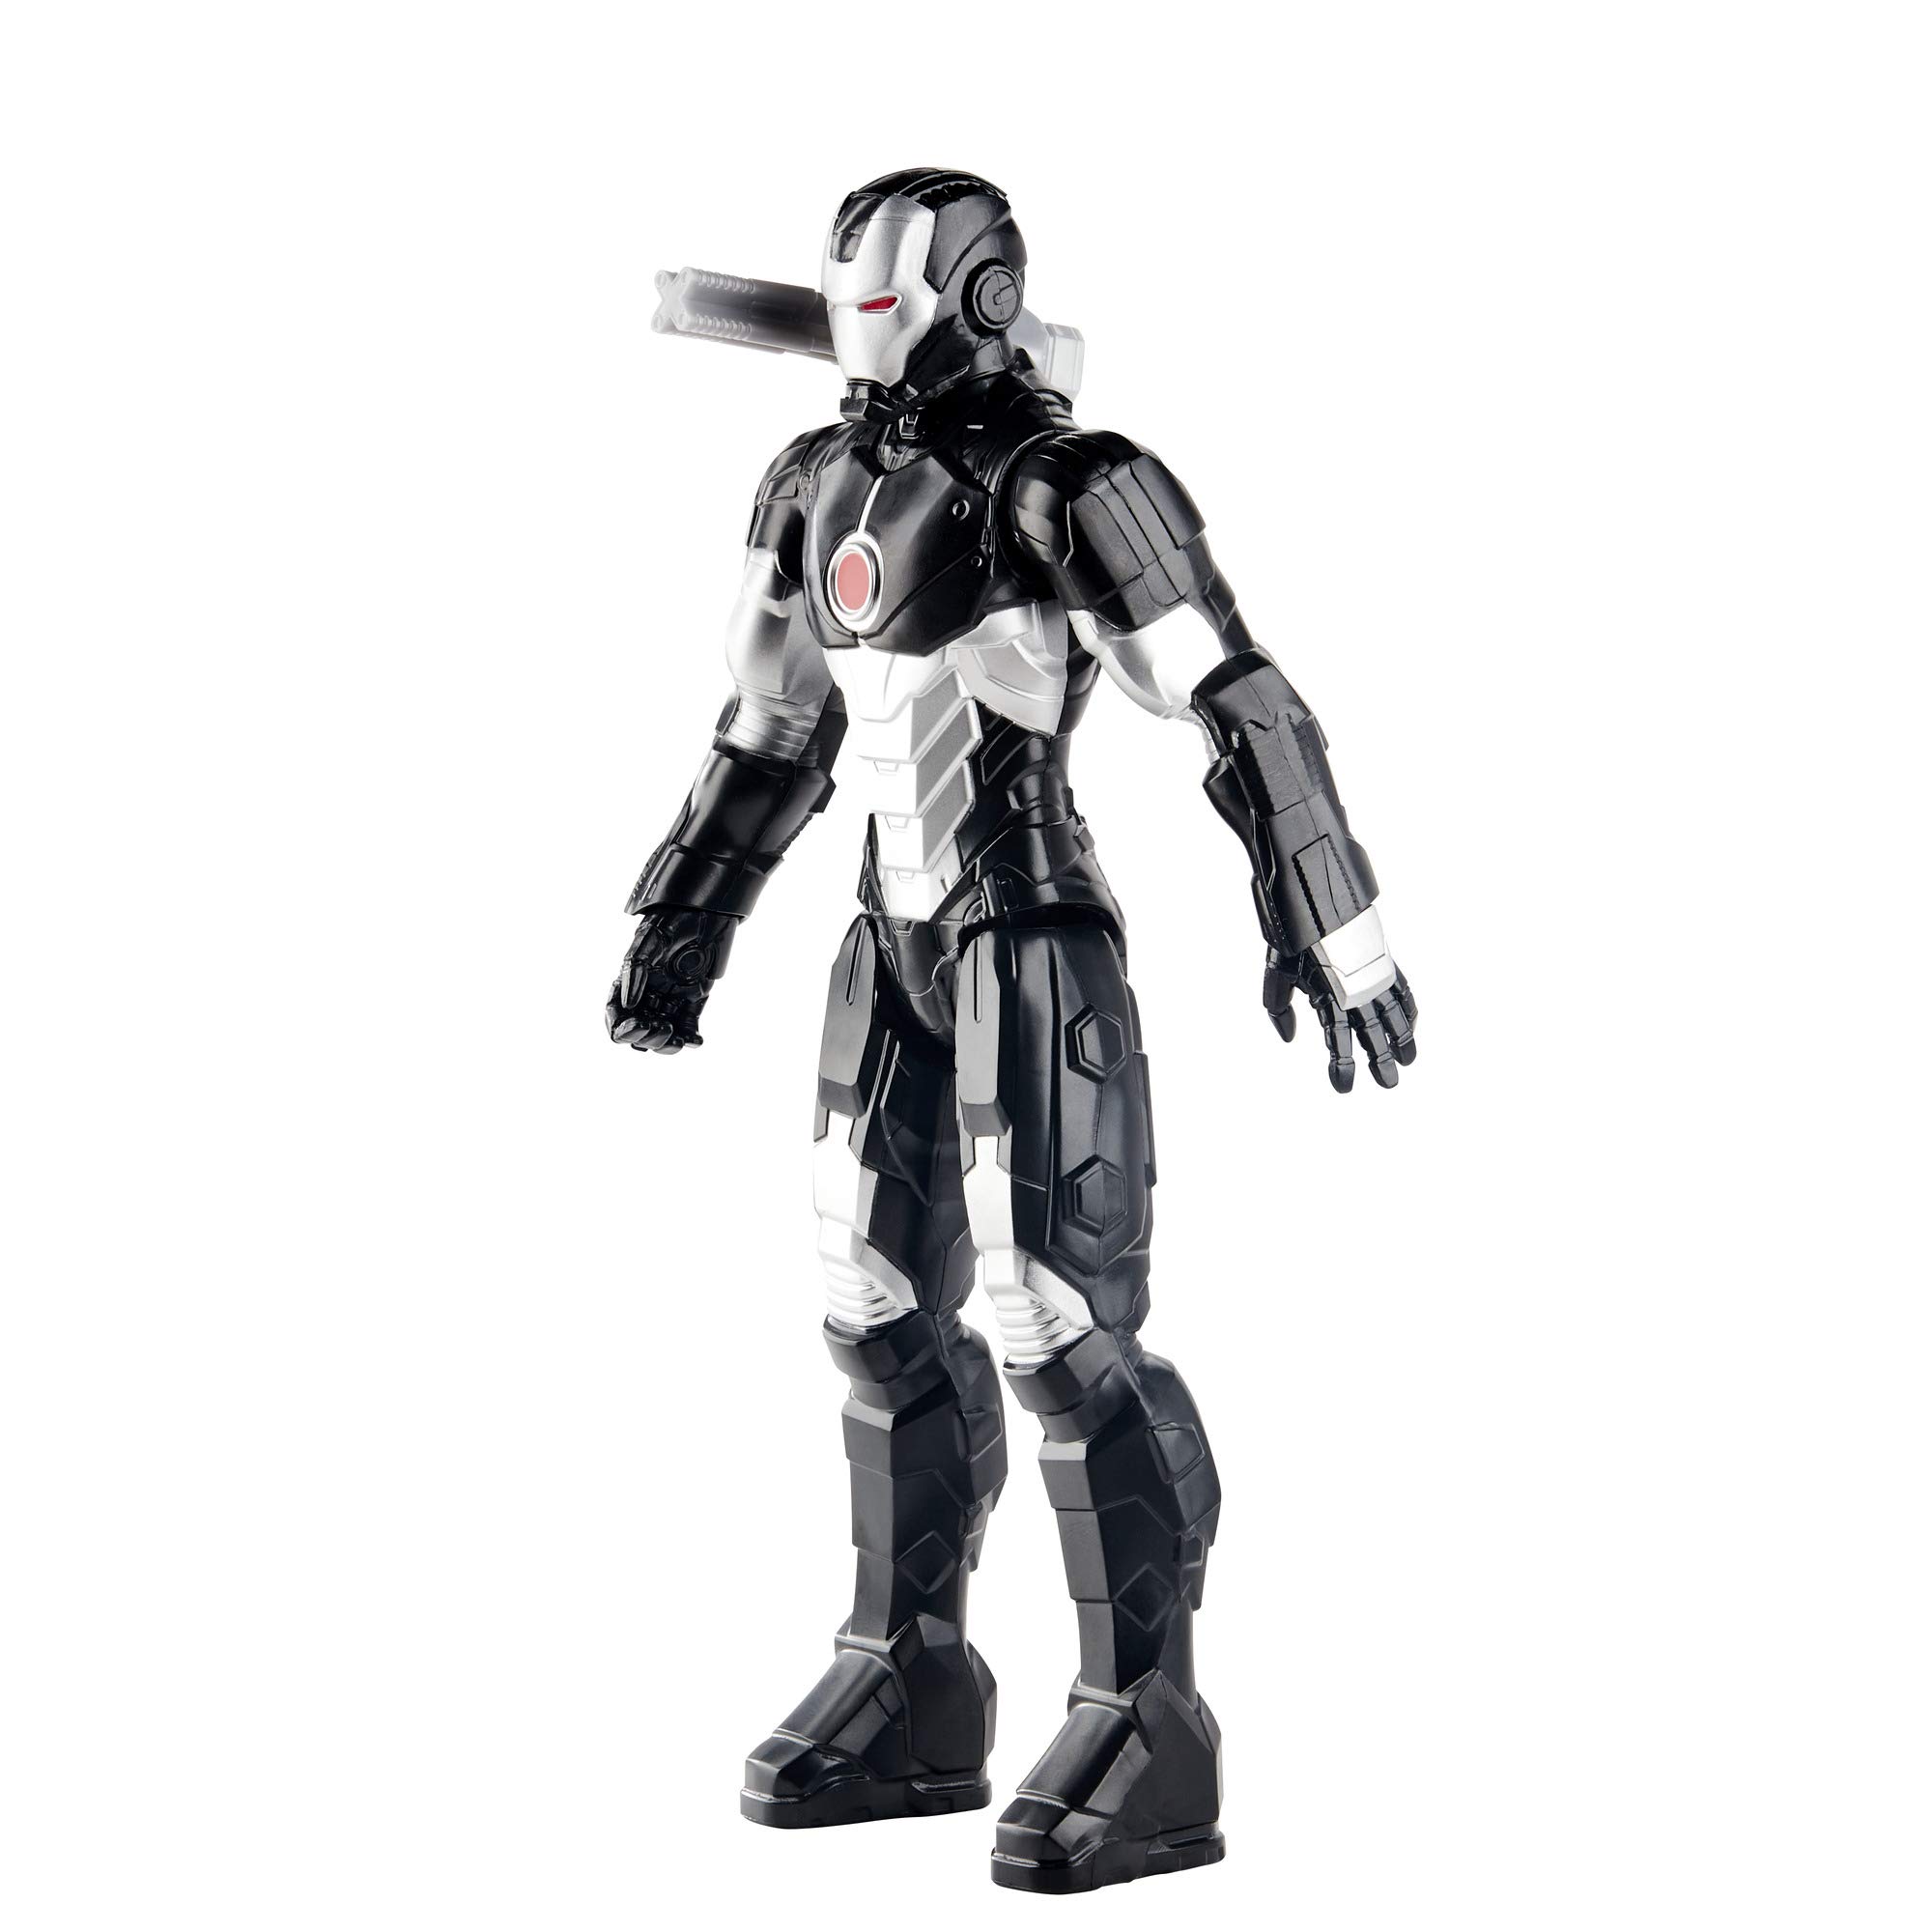 Avengers Titan Hero Series Blast Gear Marvel’s War Machine Action Figure, 12-Inch Toy, Inspired by The Marvel Universe, for Kids Ages 4 and Up